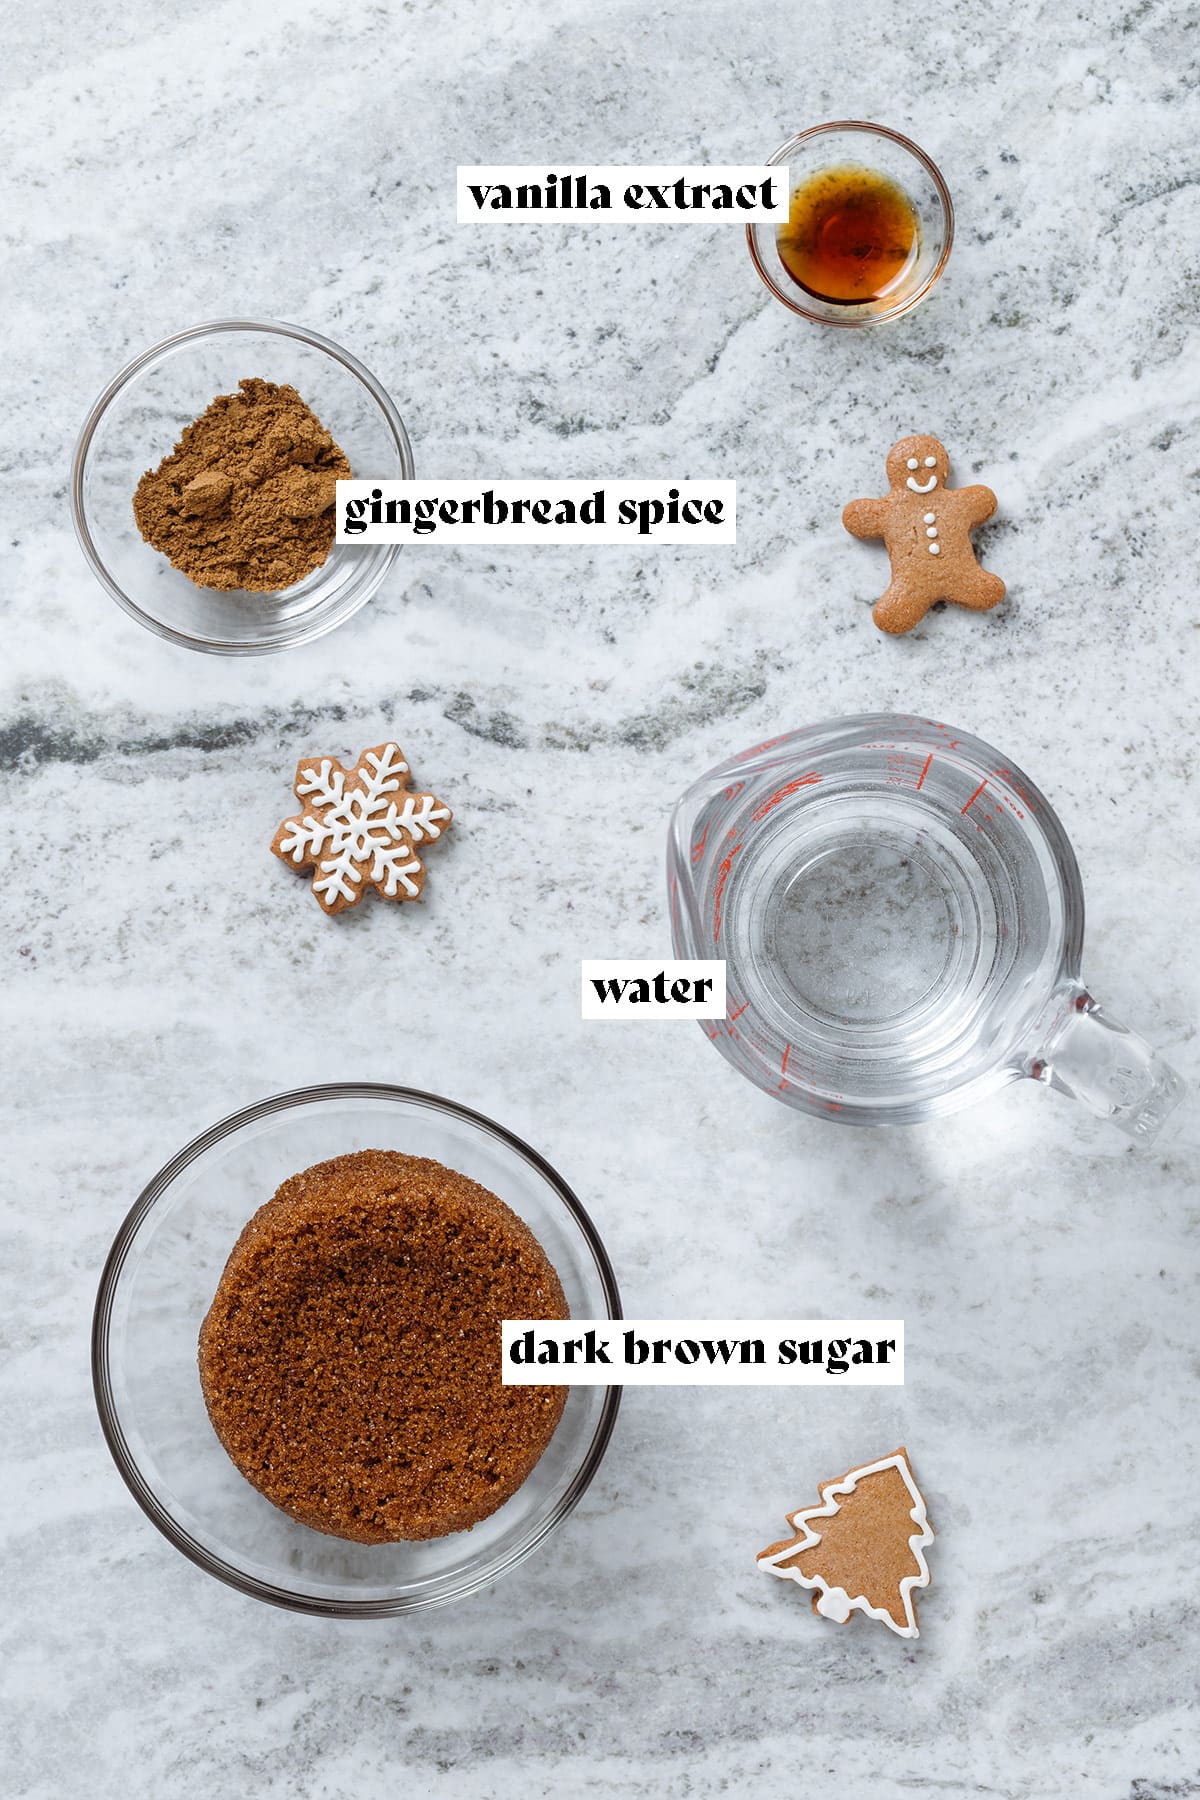 Dark brown sugar, water, vanilla extract, and gingerbread spice all measured out in glass bowls with text overlay.